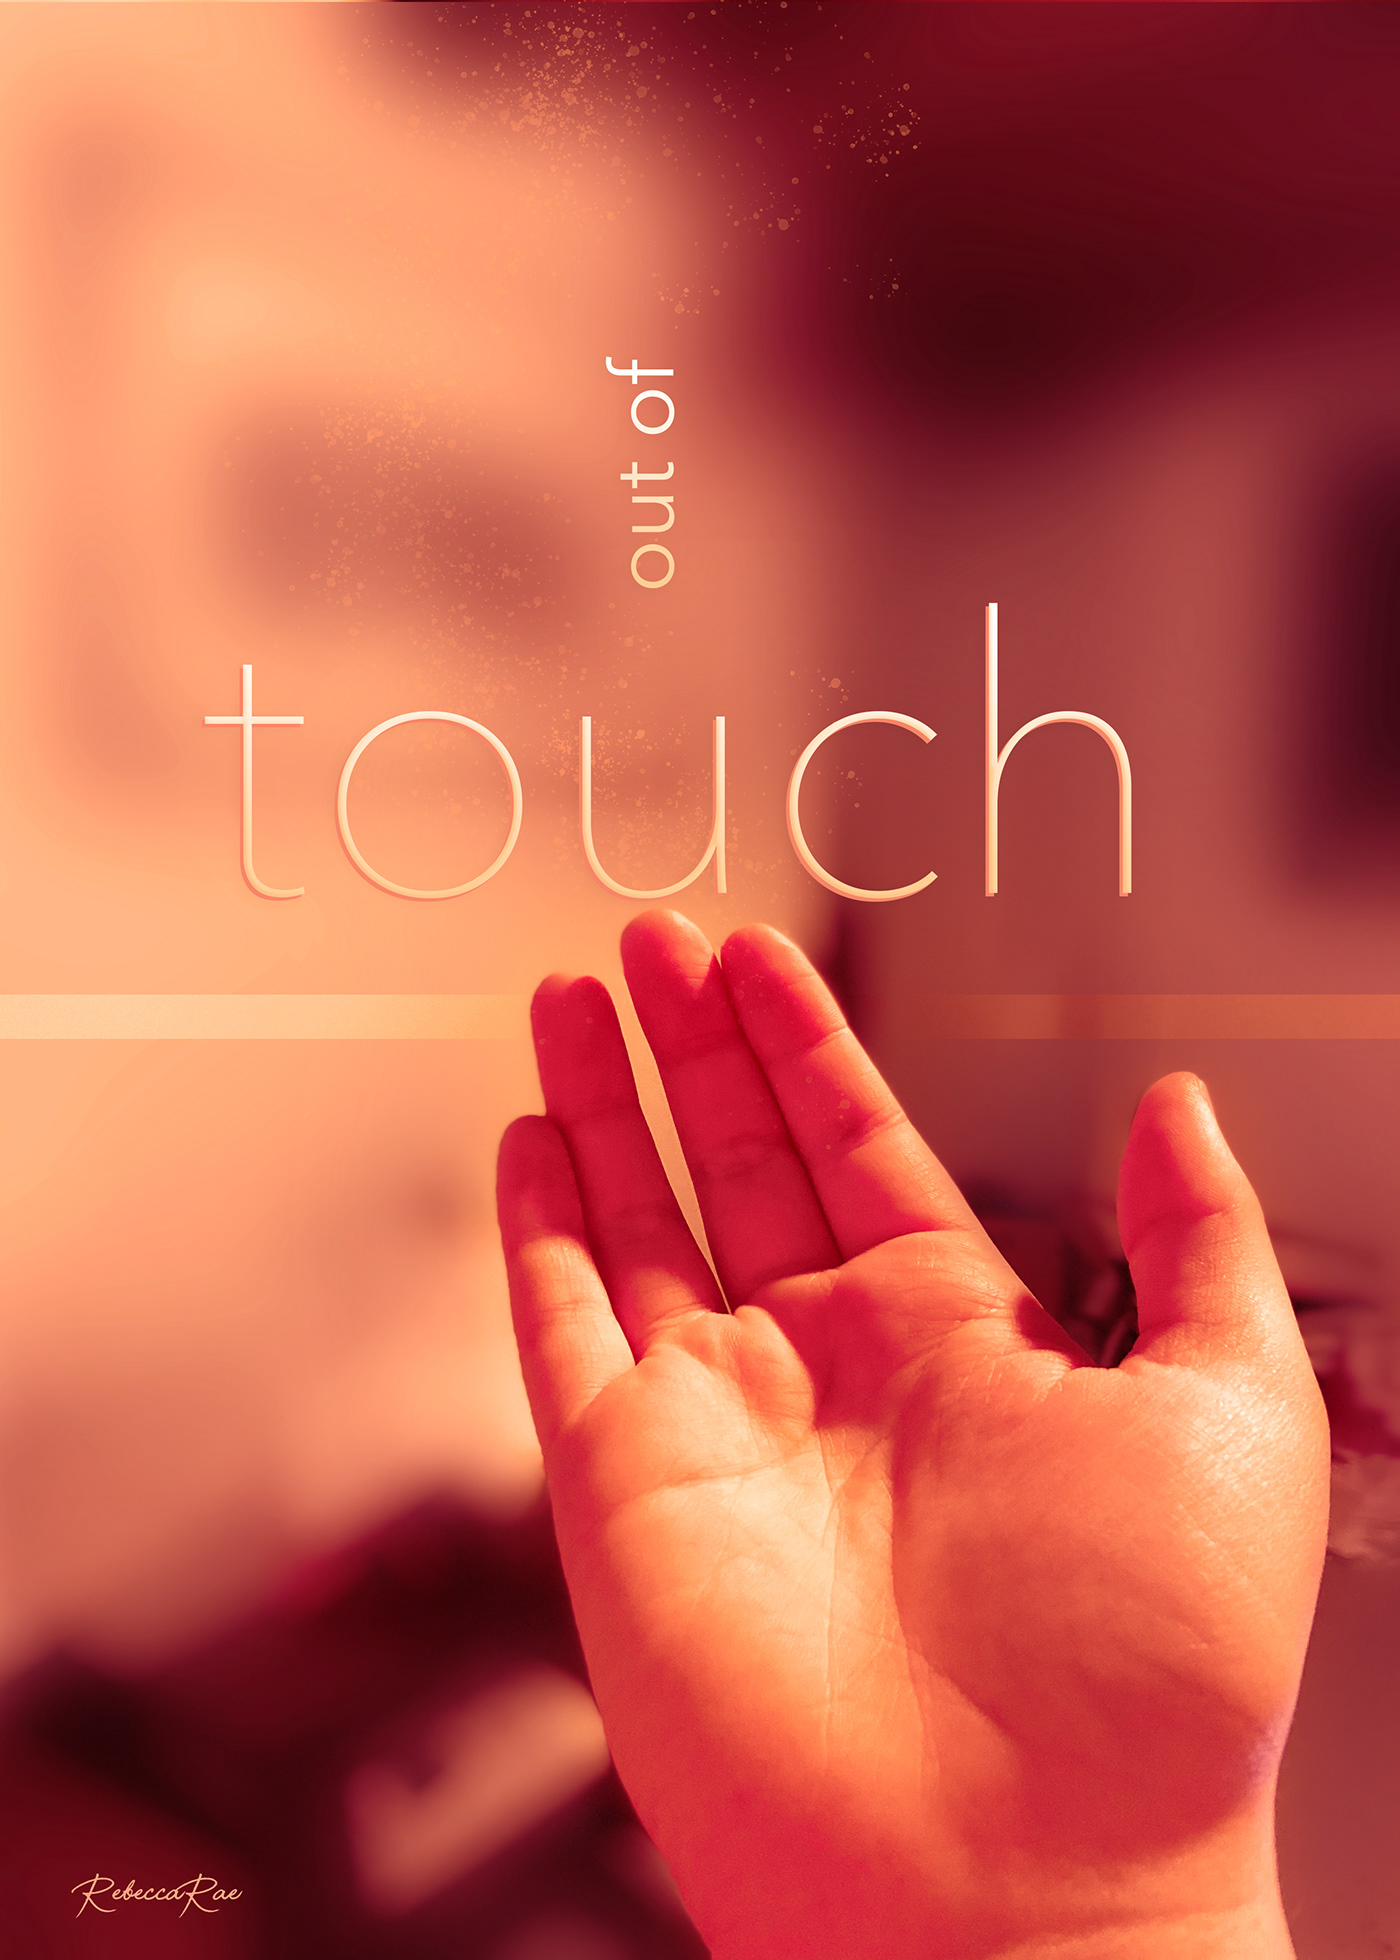 Out of Touch. Hand reaching out to touch the text but cannot touch it. Tension between words & image